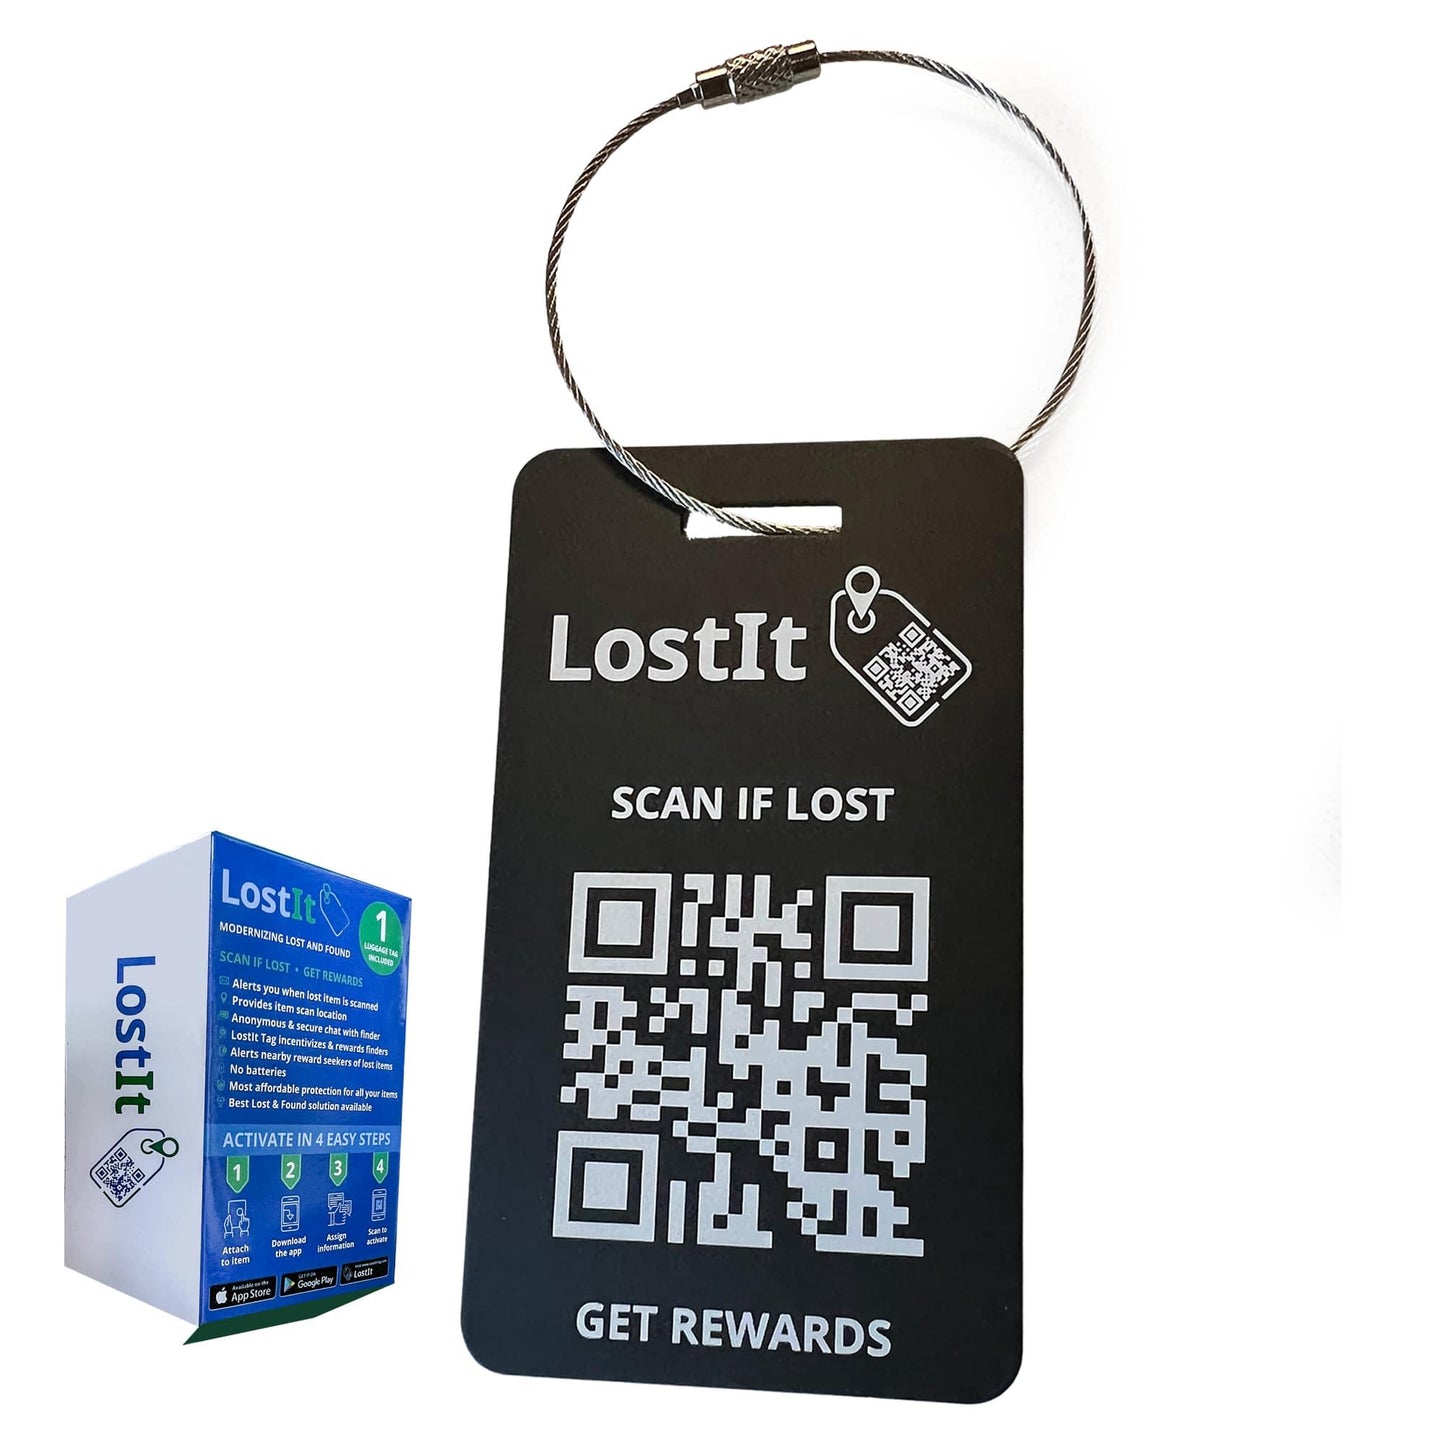 Personalized travel identifier and QR code smart luggage and suitcase name tag for lost and found.